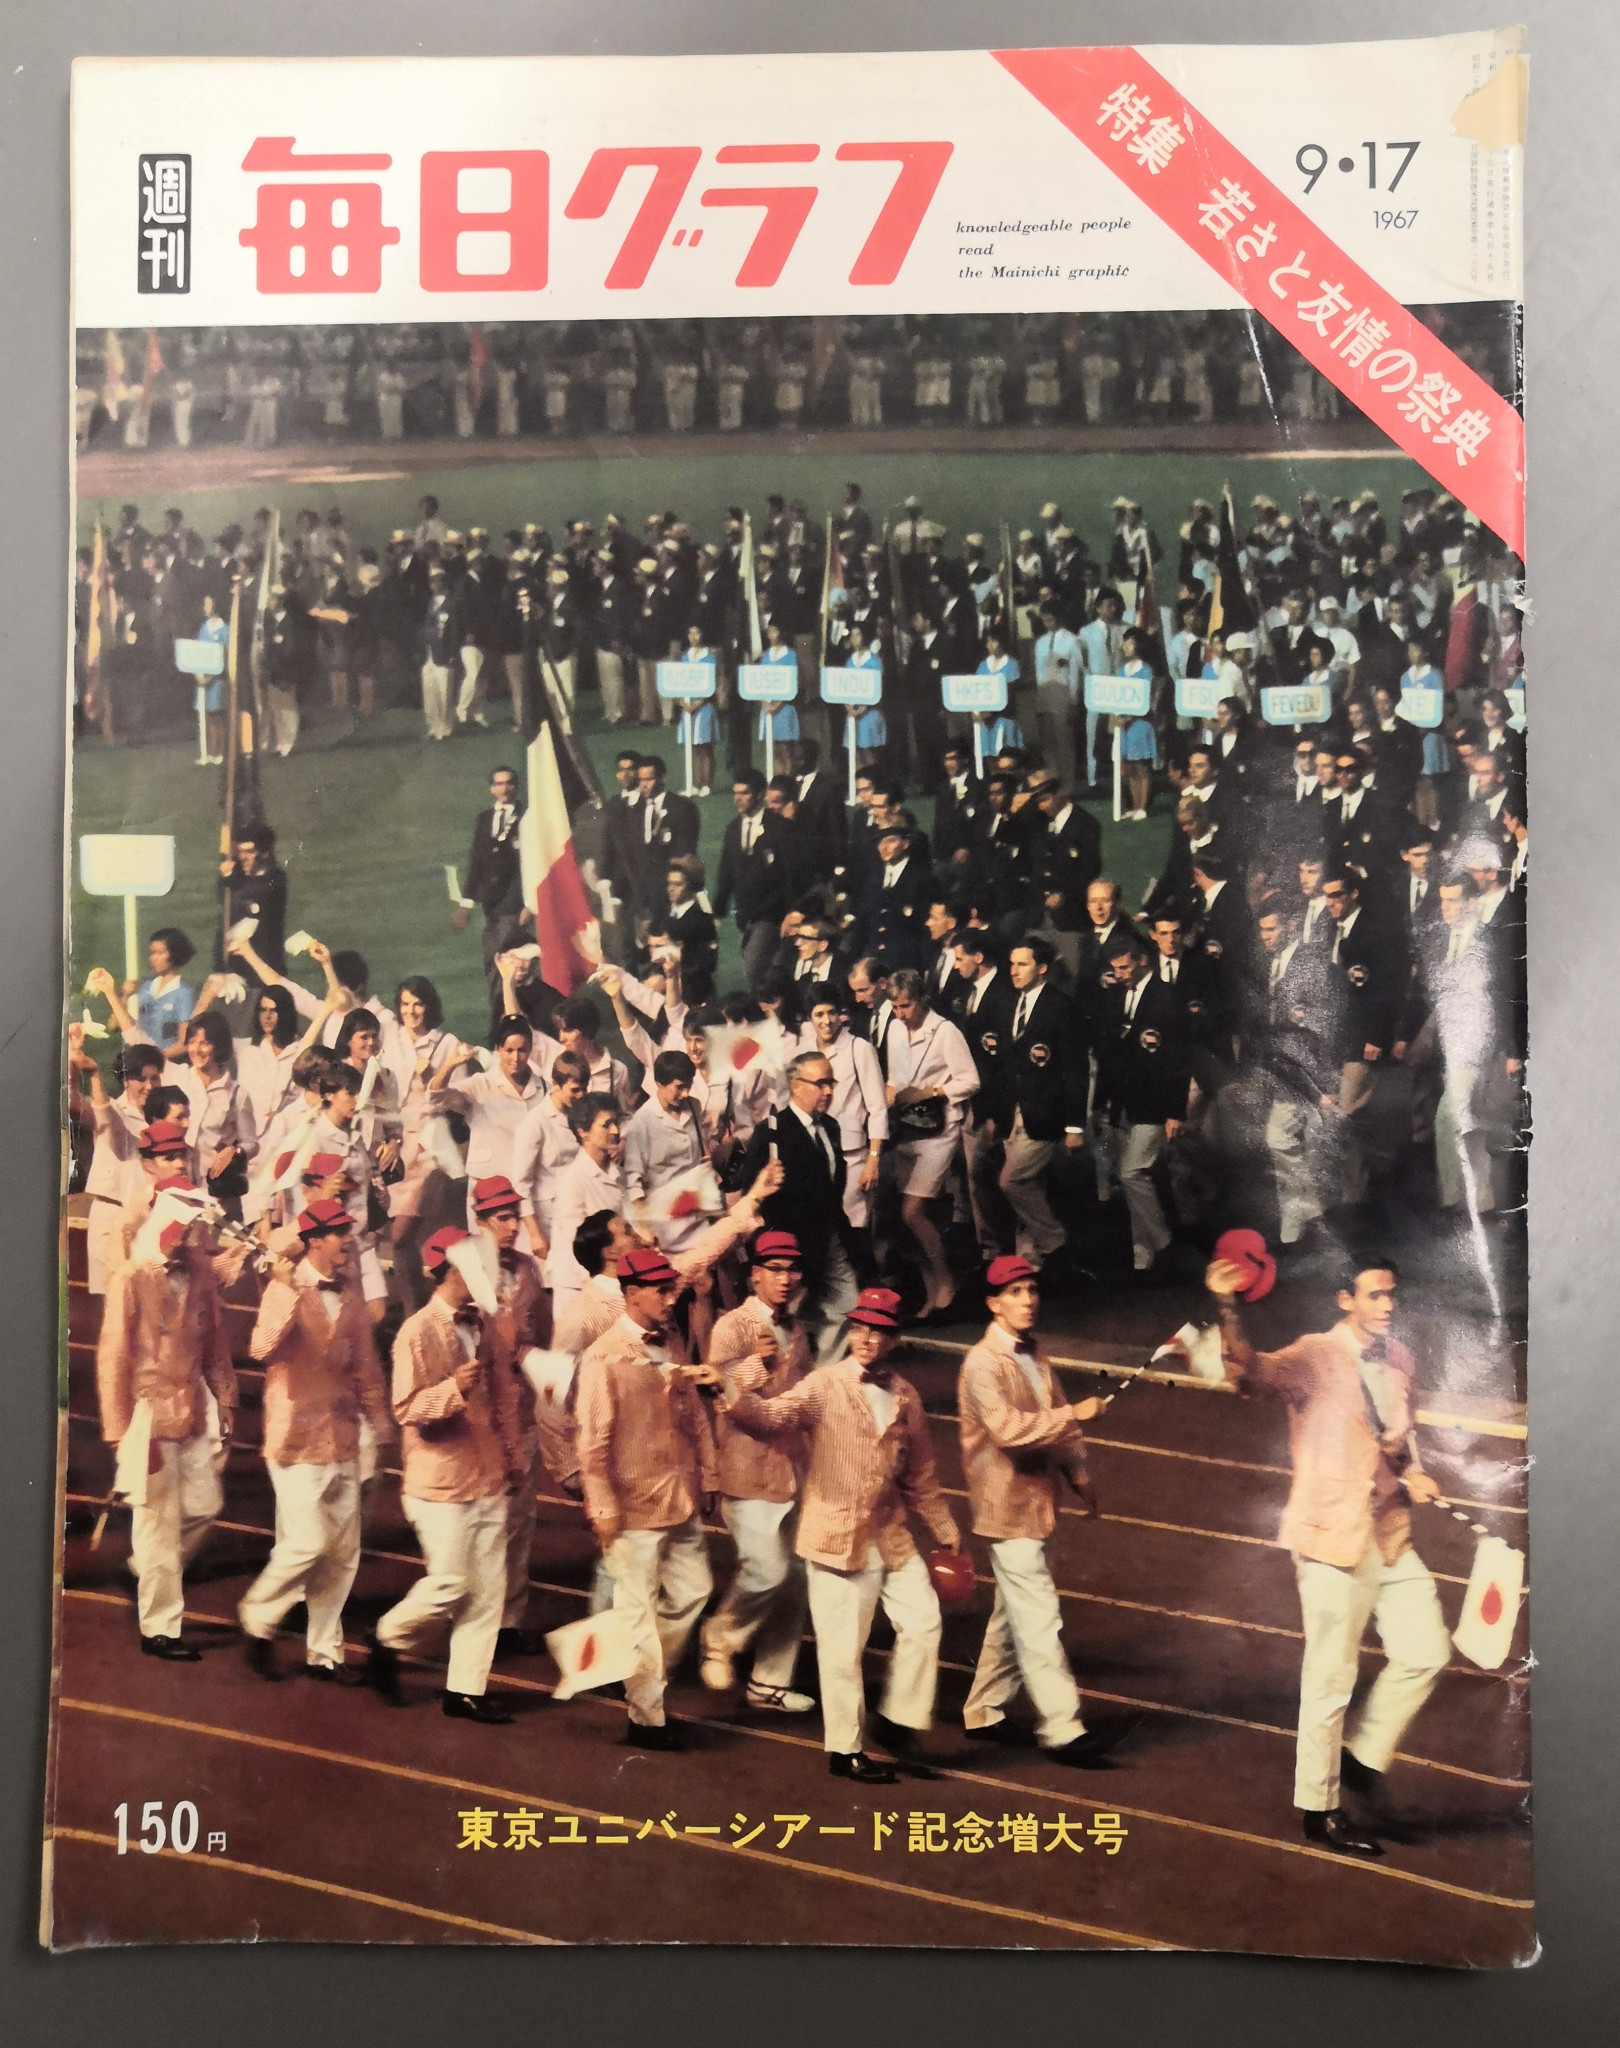 The entry of the Japanese team at the 1967 Universiade, as depicted on a magazine cover ©FISU